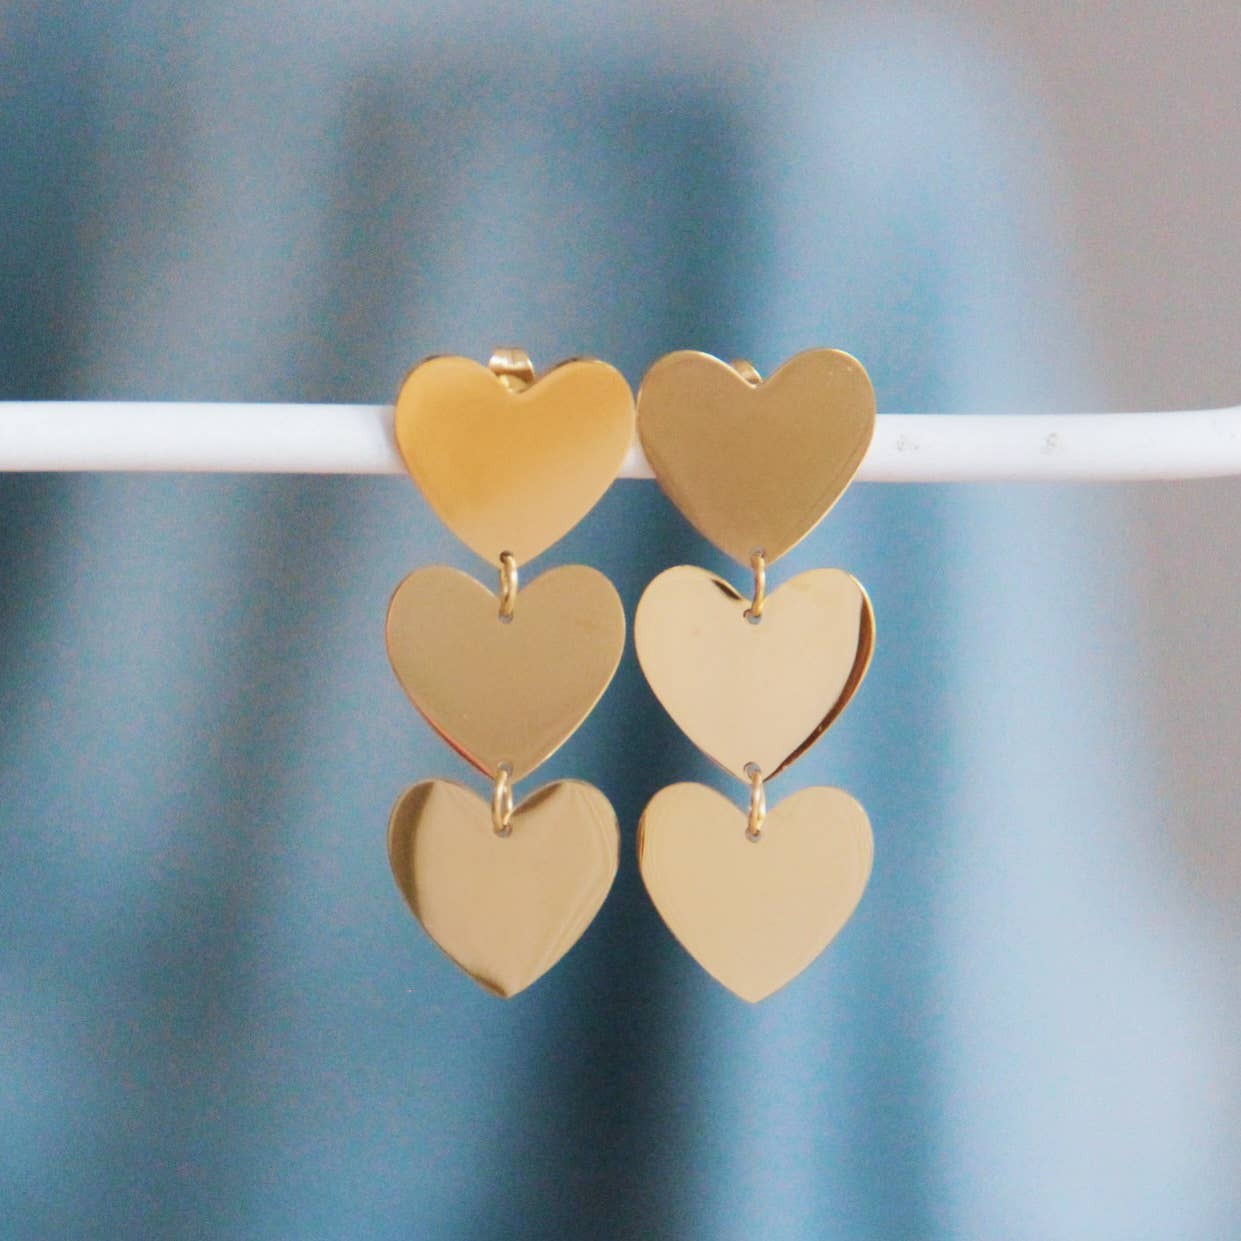 BZ - Statement earring 3 hearts – gold